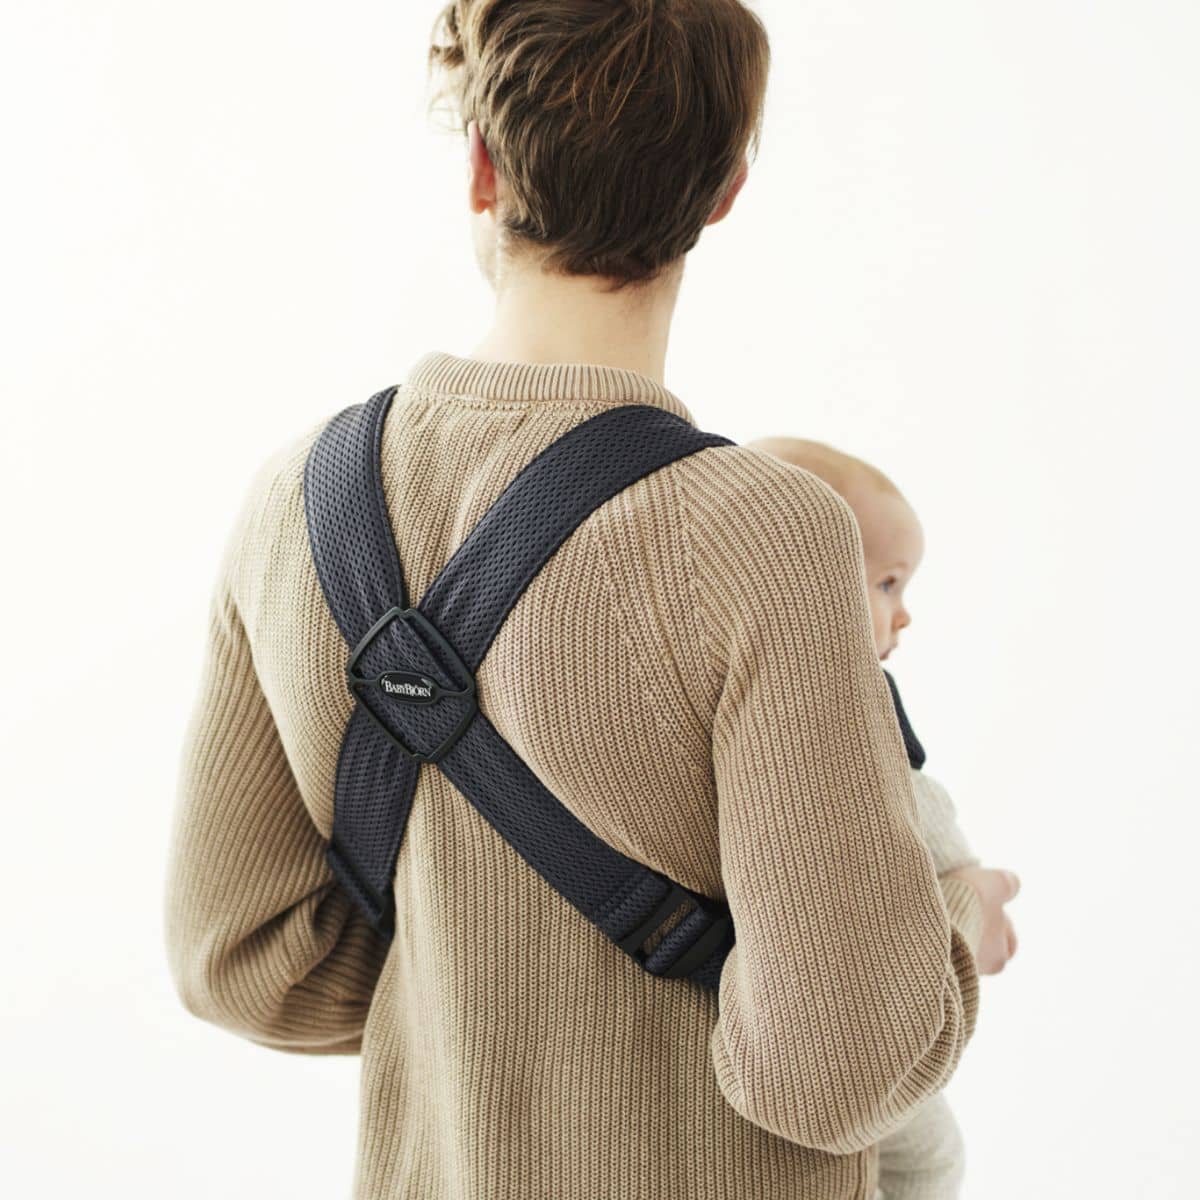 BabyBjorn Baby Carrier Mini - Anthracite 3D Mesh